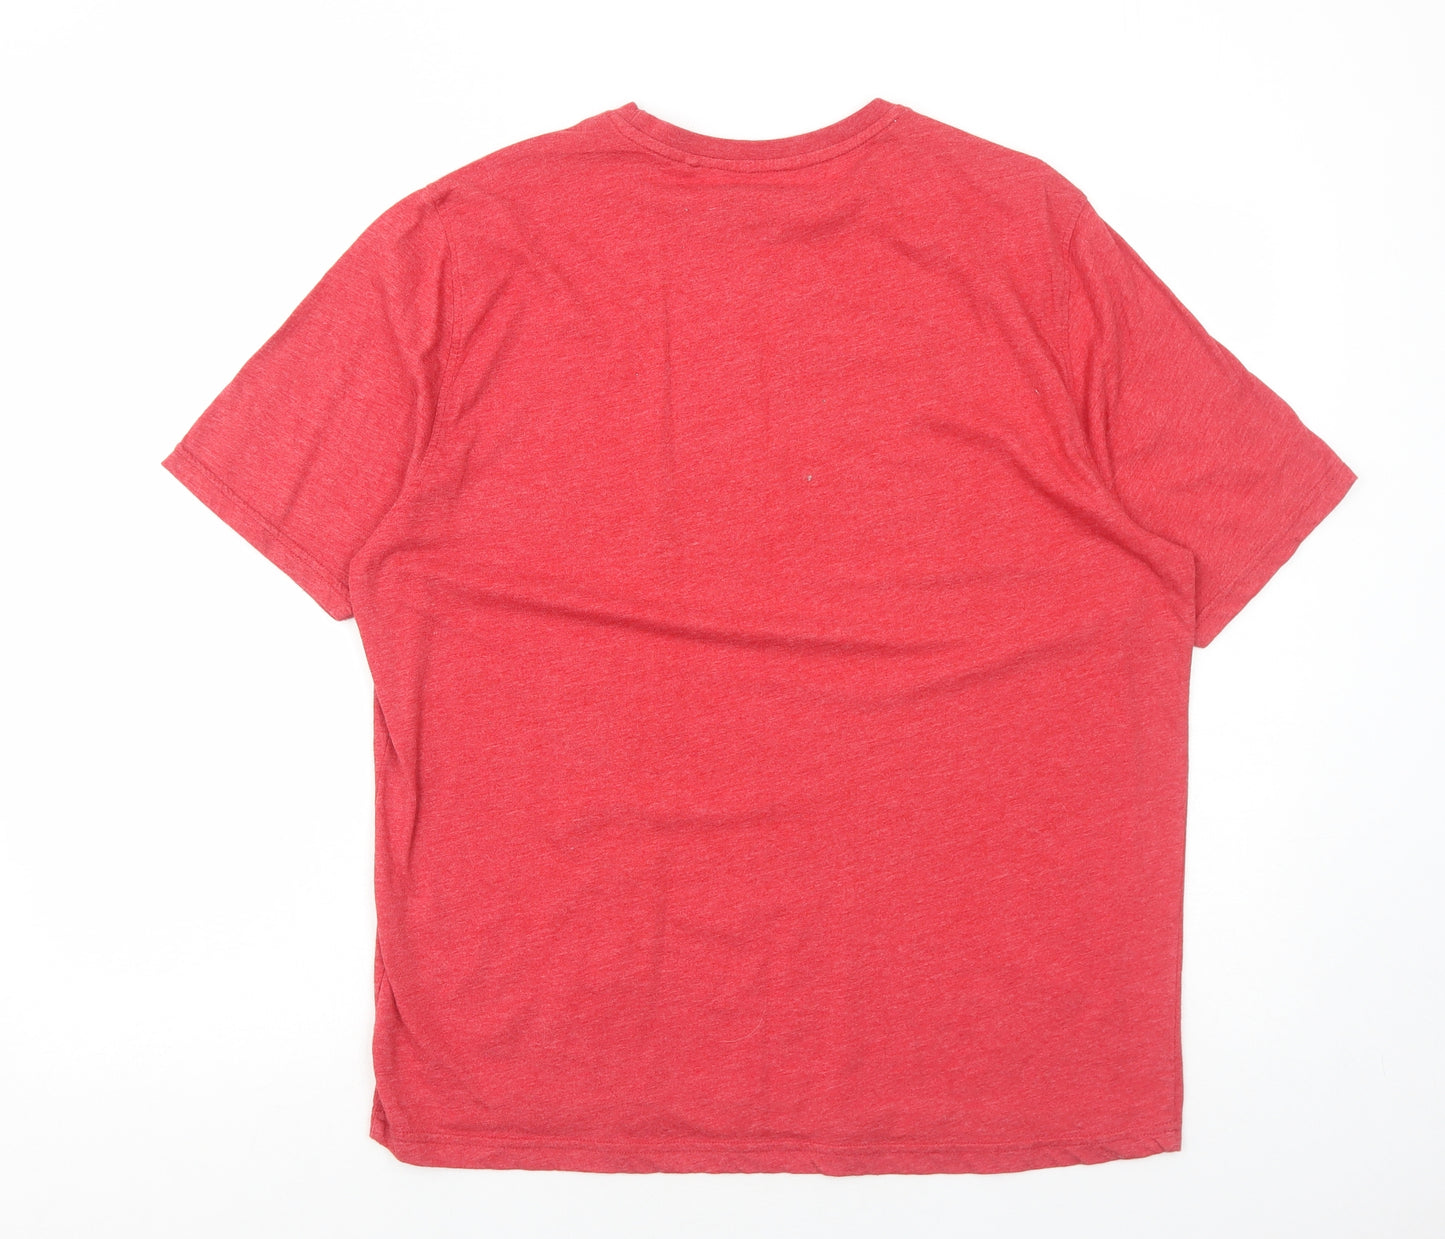 George Mens Red Cotton T-Shirt Size L Crew Neck - Day Off